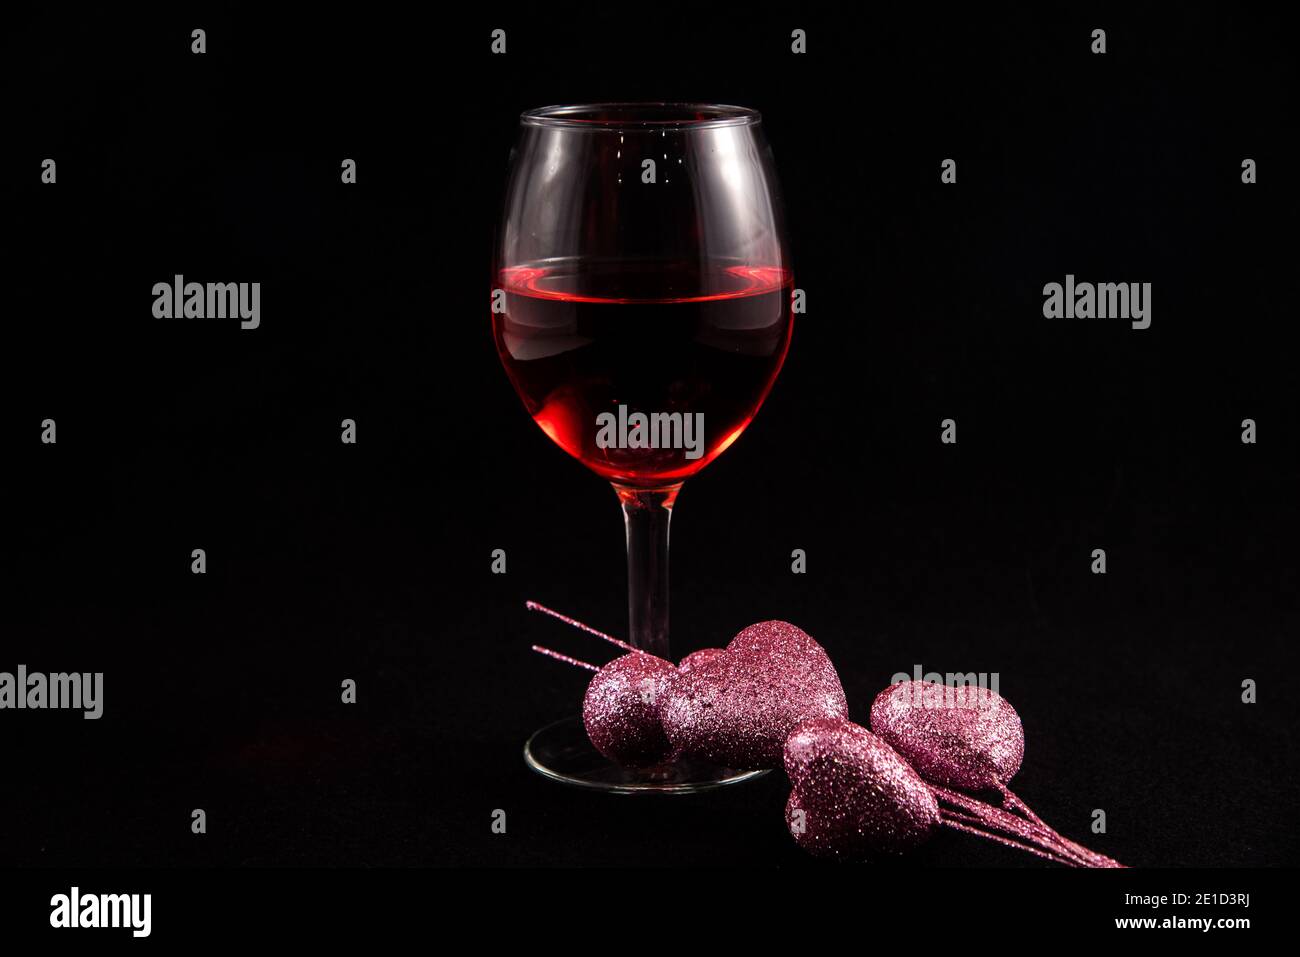 Single wine glass with Valentine hearts against a black background. Stock Photo